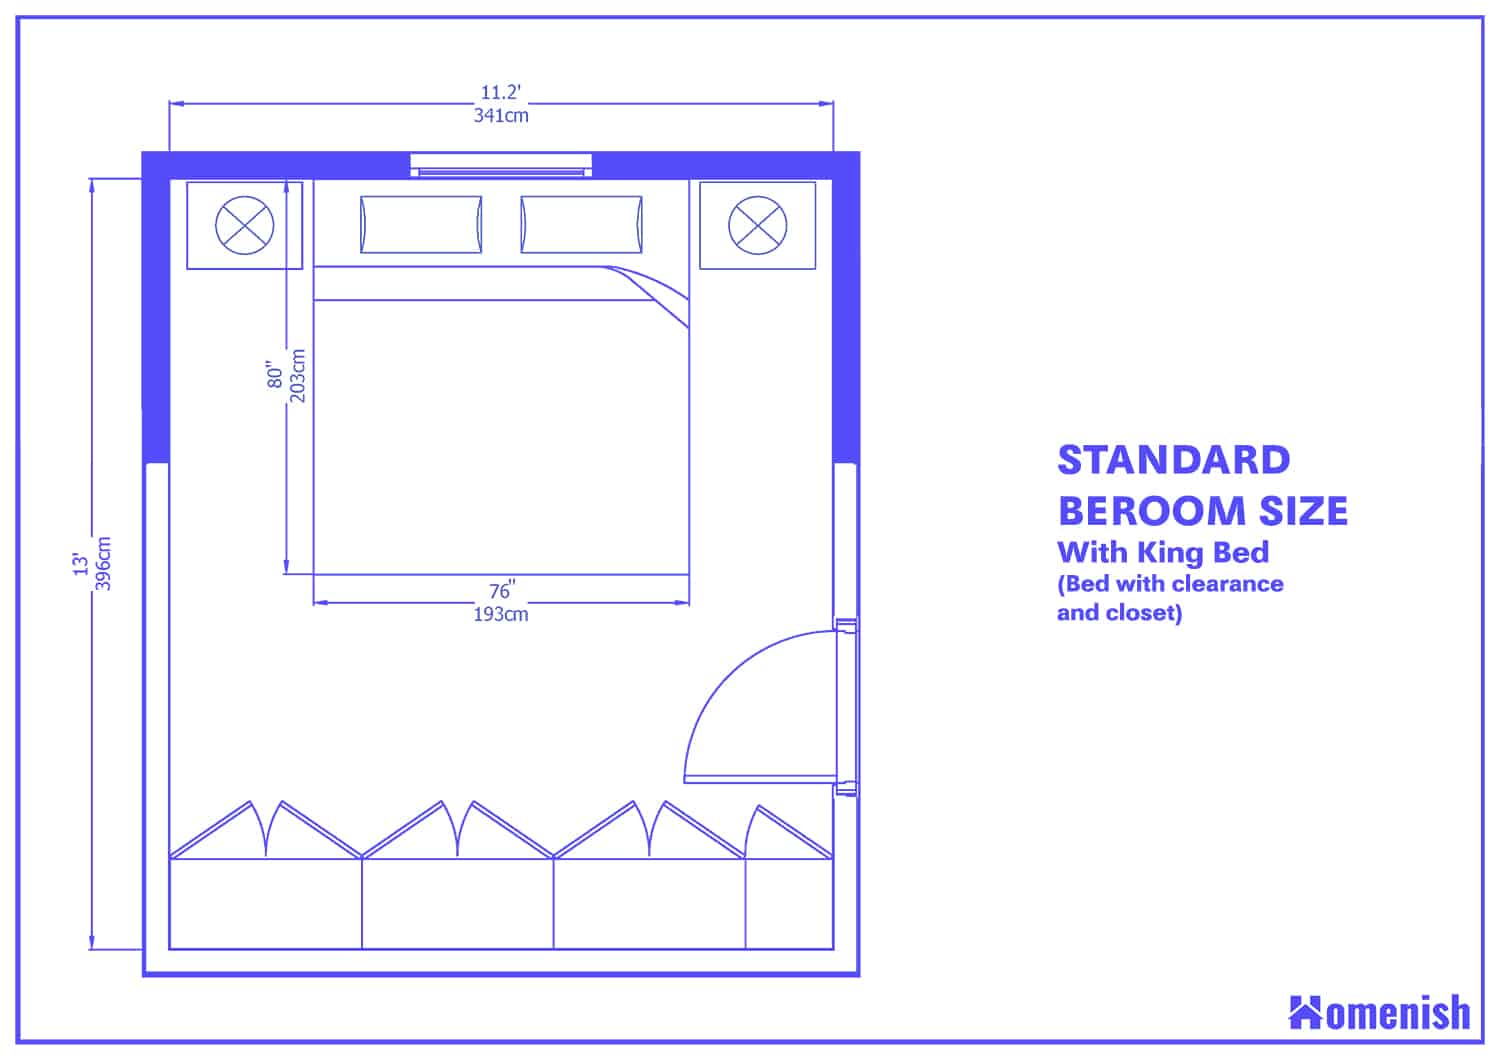 Standard Bedroom Size with KING BED (with Closet & Clearance)